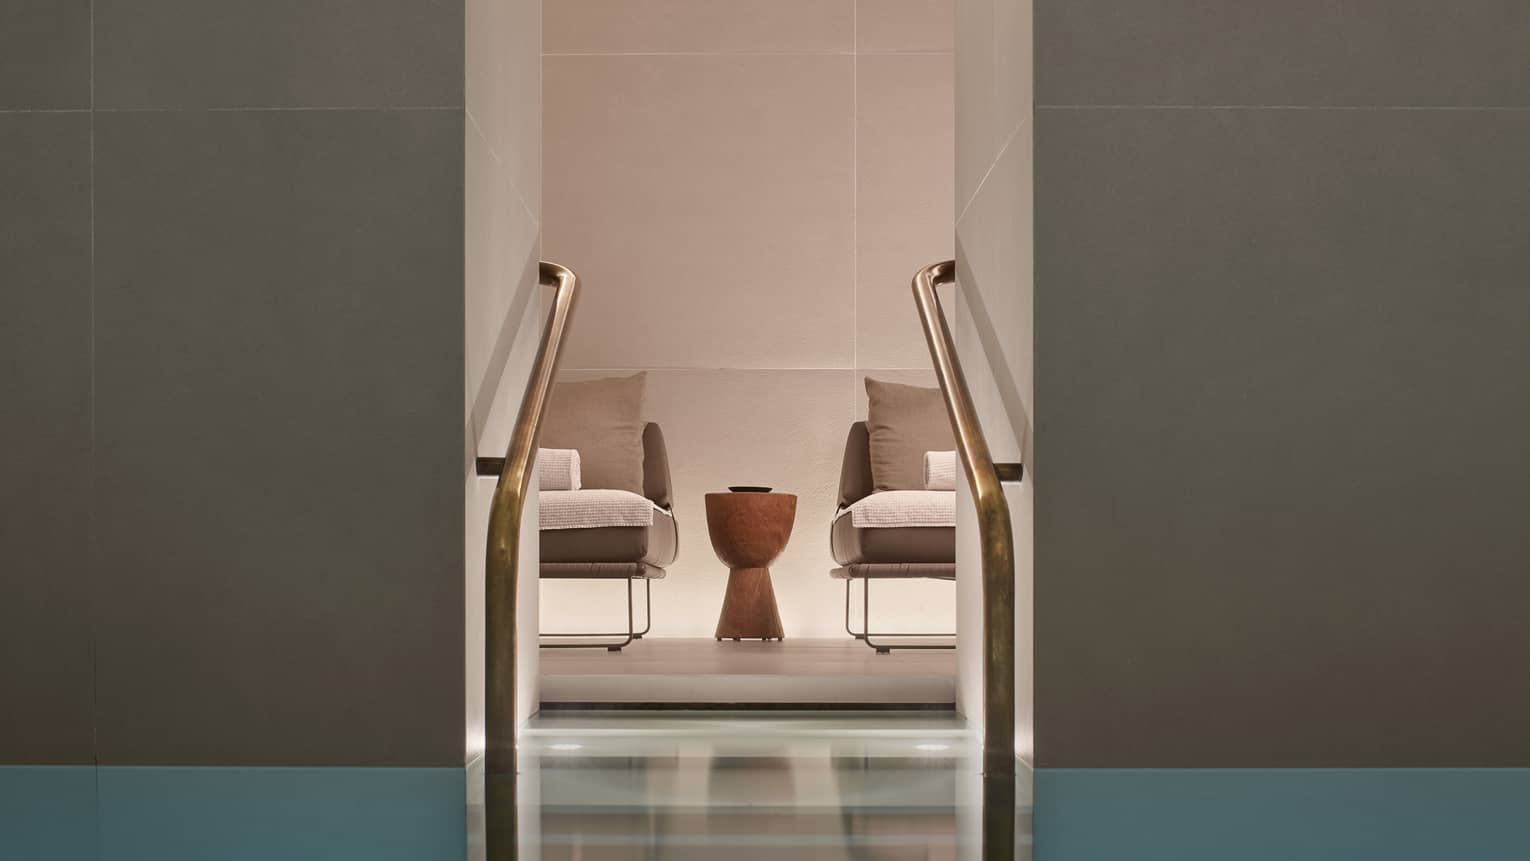 Two chairs and small table as seen from Milan Spa lap pool staircase with railings